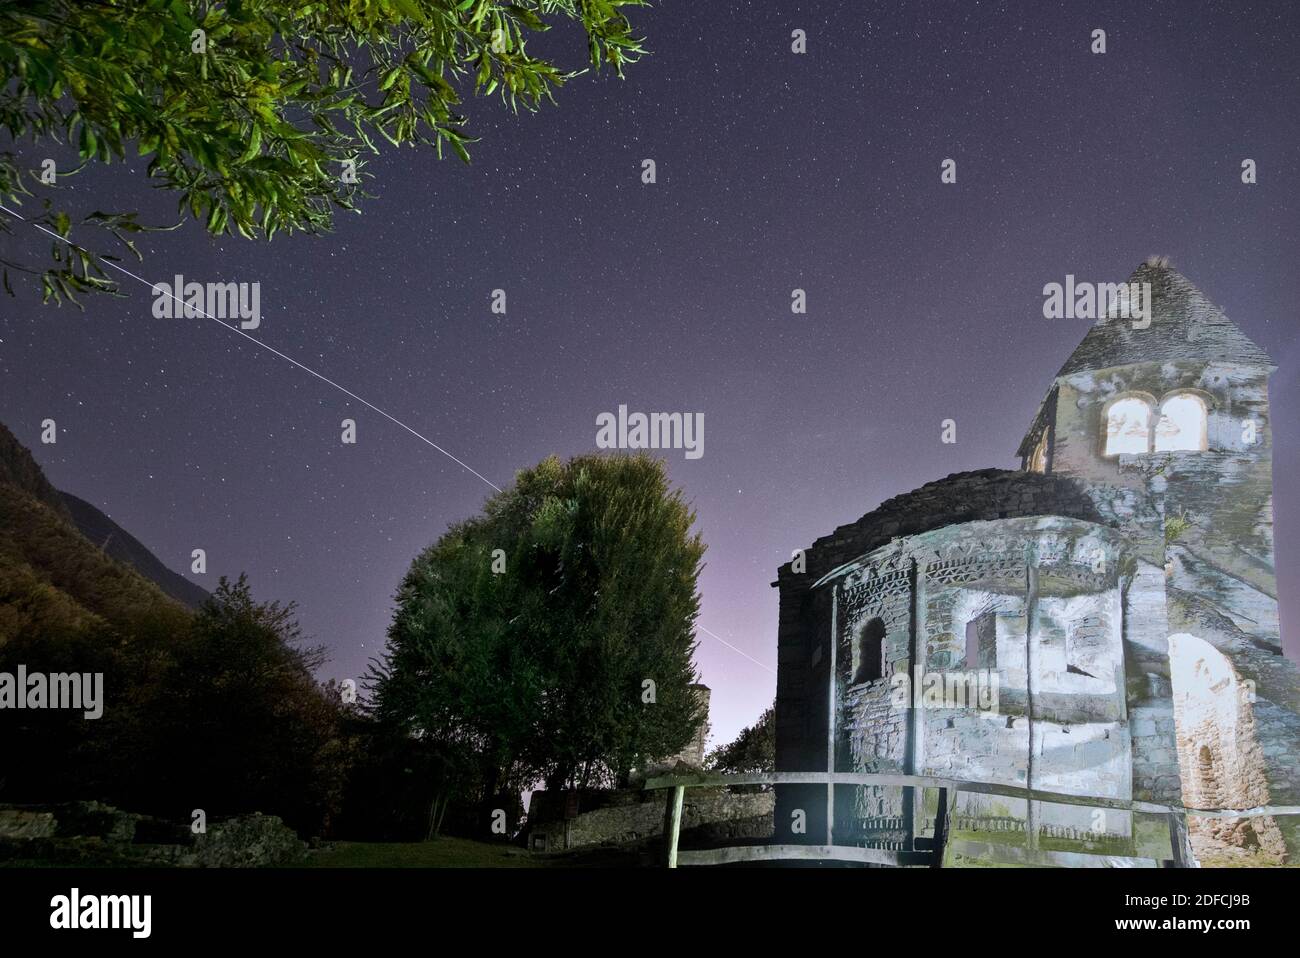 The International Space Station (ISS) path line in the night sky over San Pietro in Vallate abbey, Valtellina, Lombardy, Italy Stock Photo